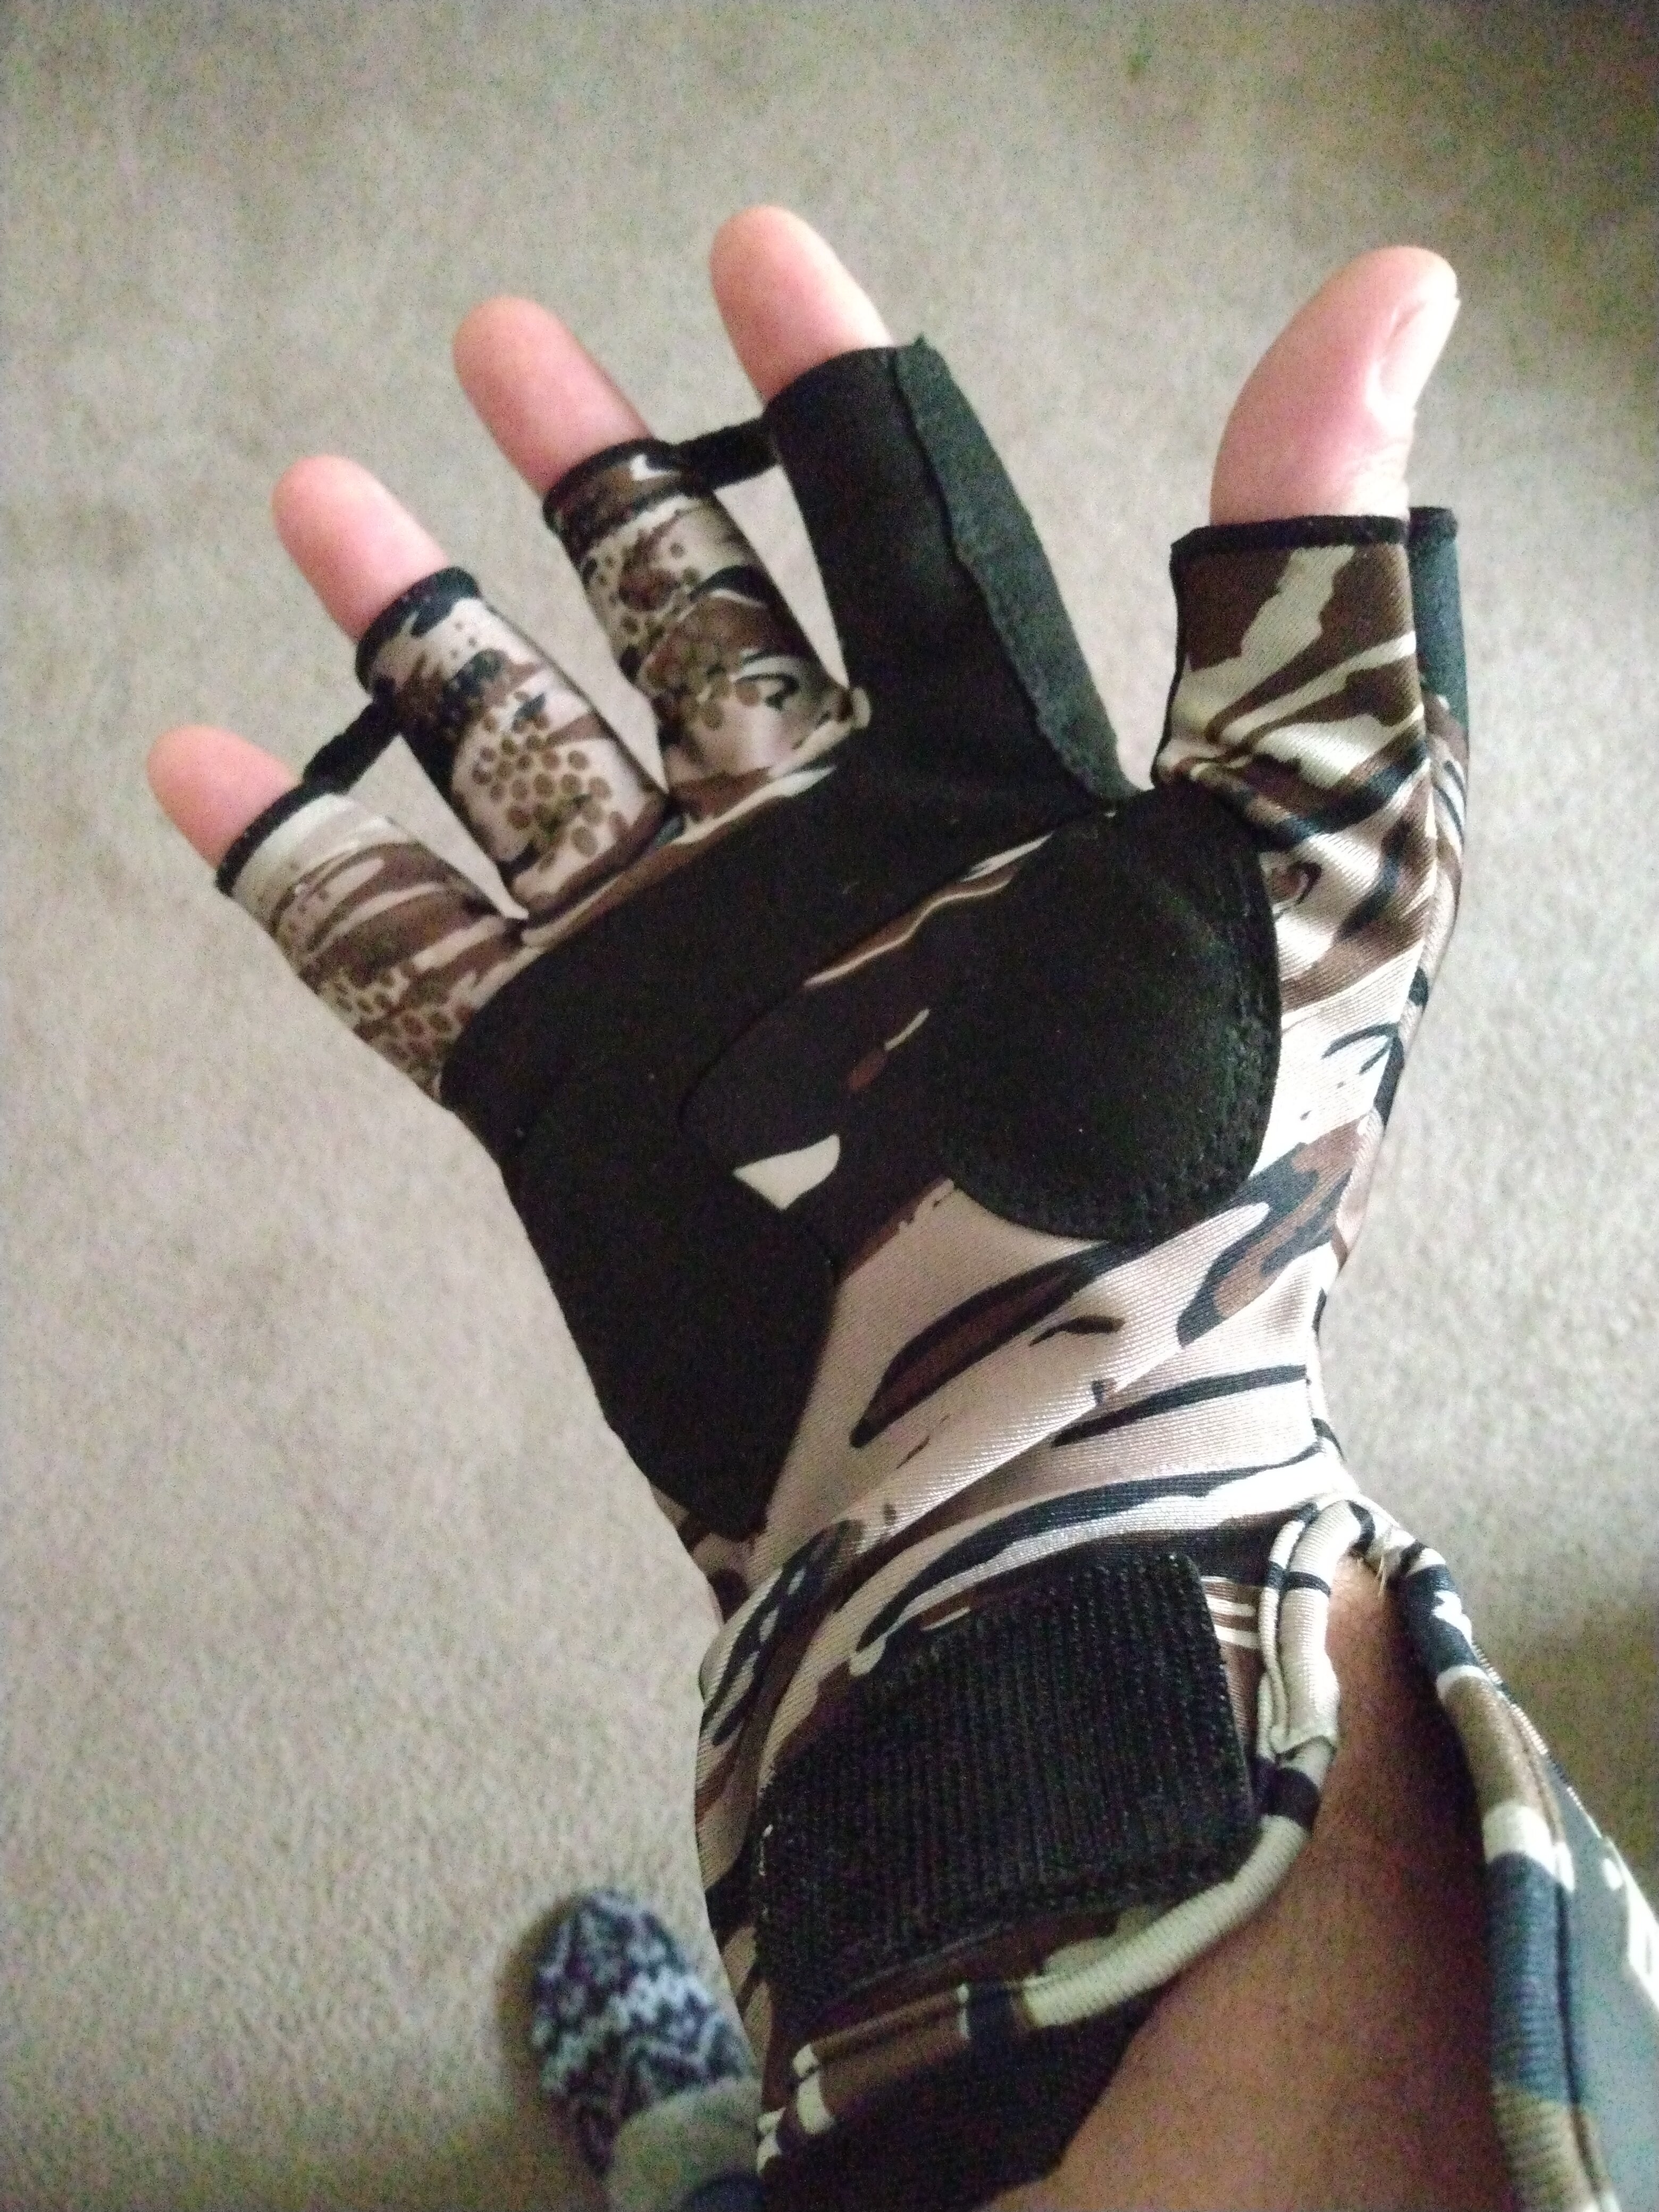 Stand Mitts by Chill-N-Reel: Warm Thumbless Mittens for Hunting